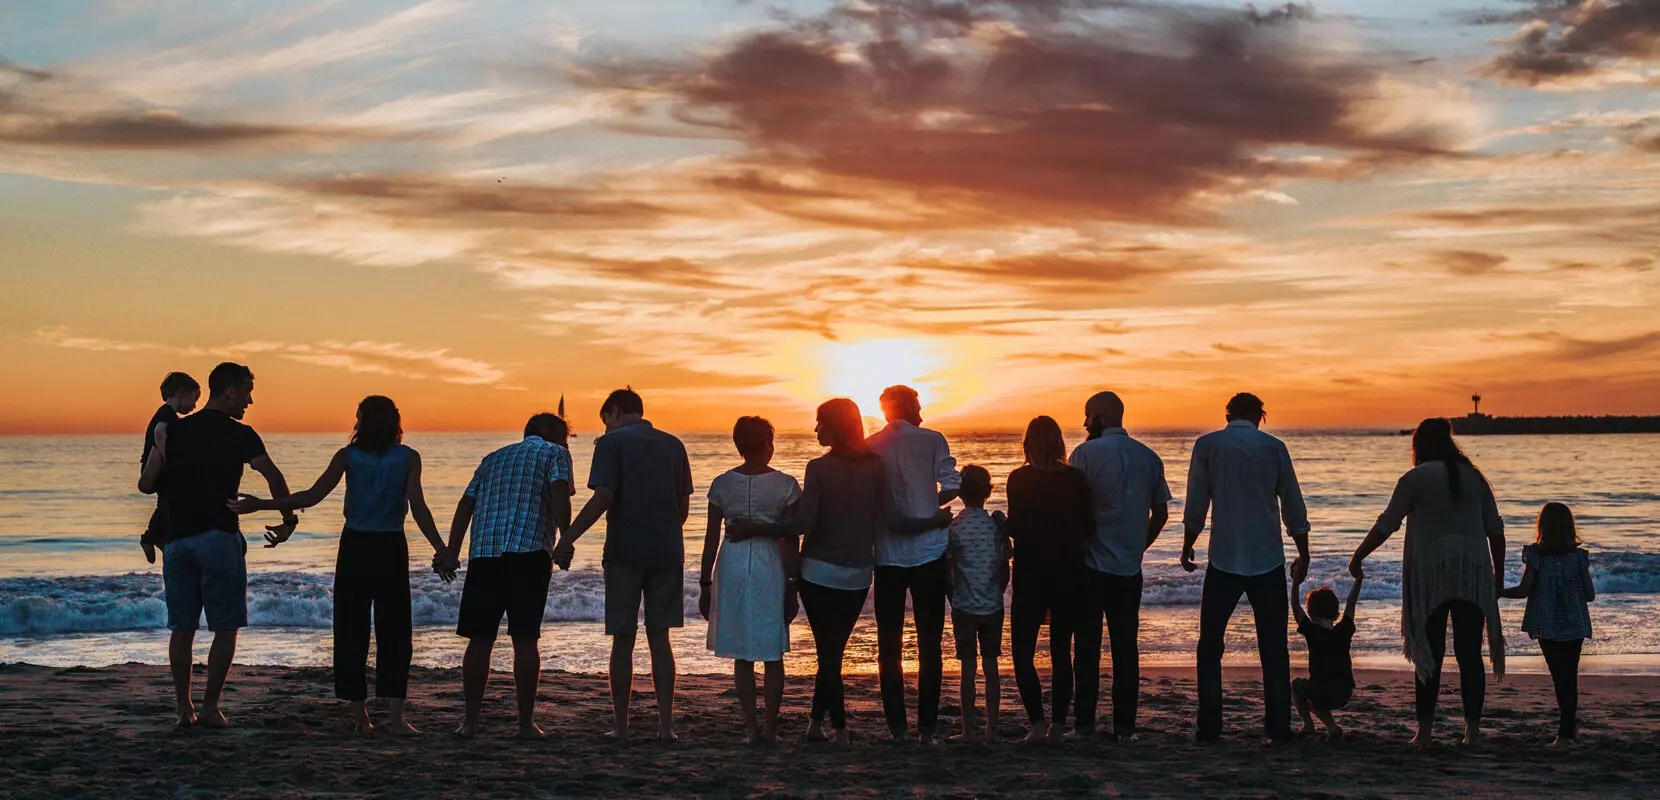 a community of multigenerational people standing on a beach together at sunset